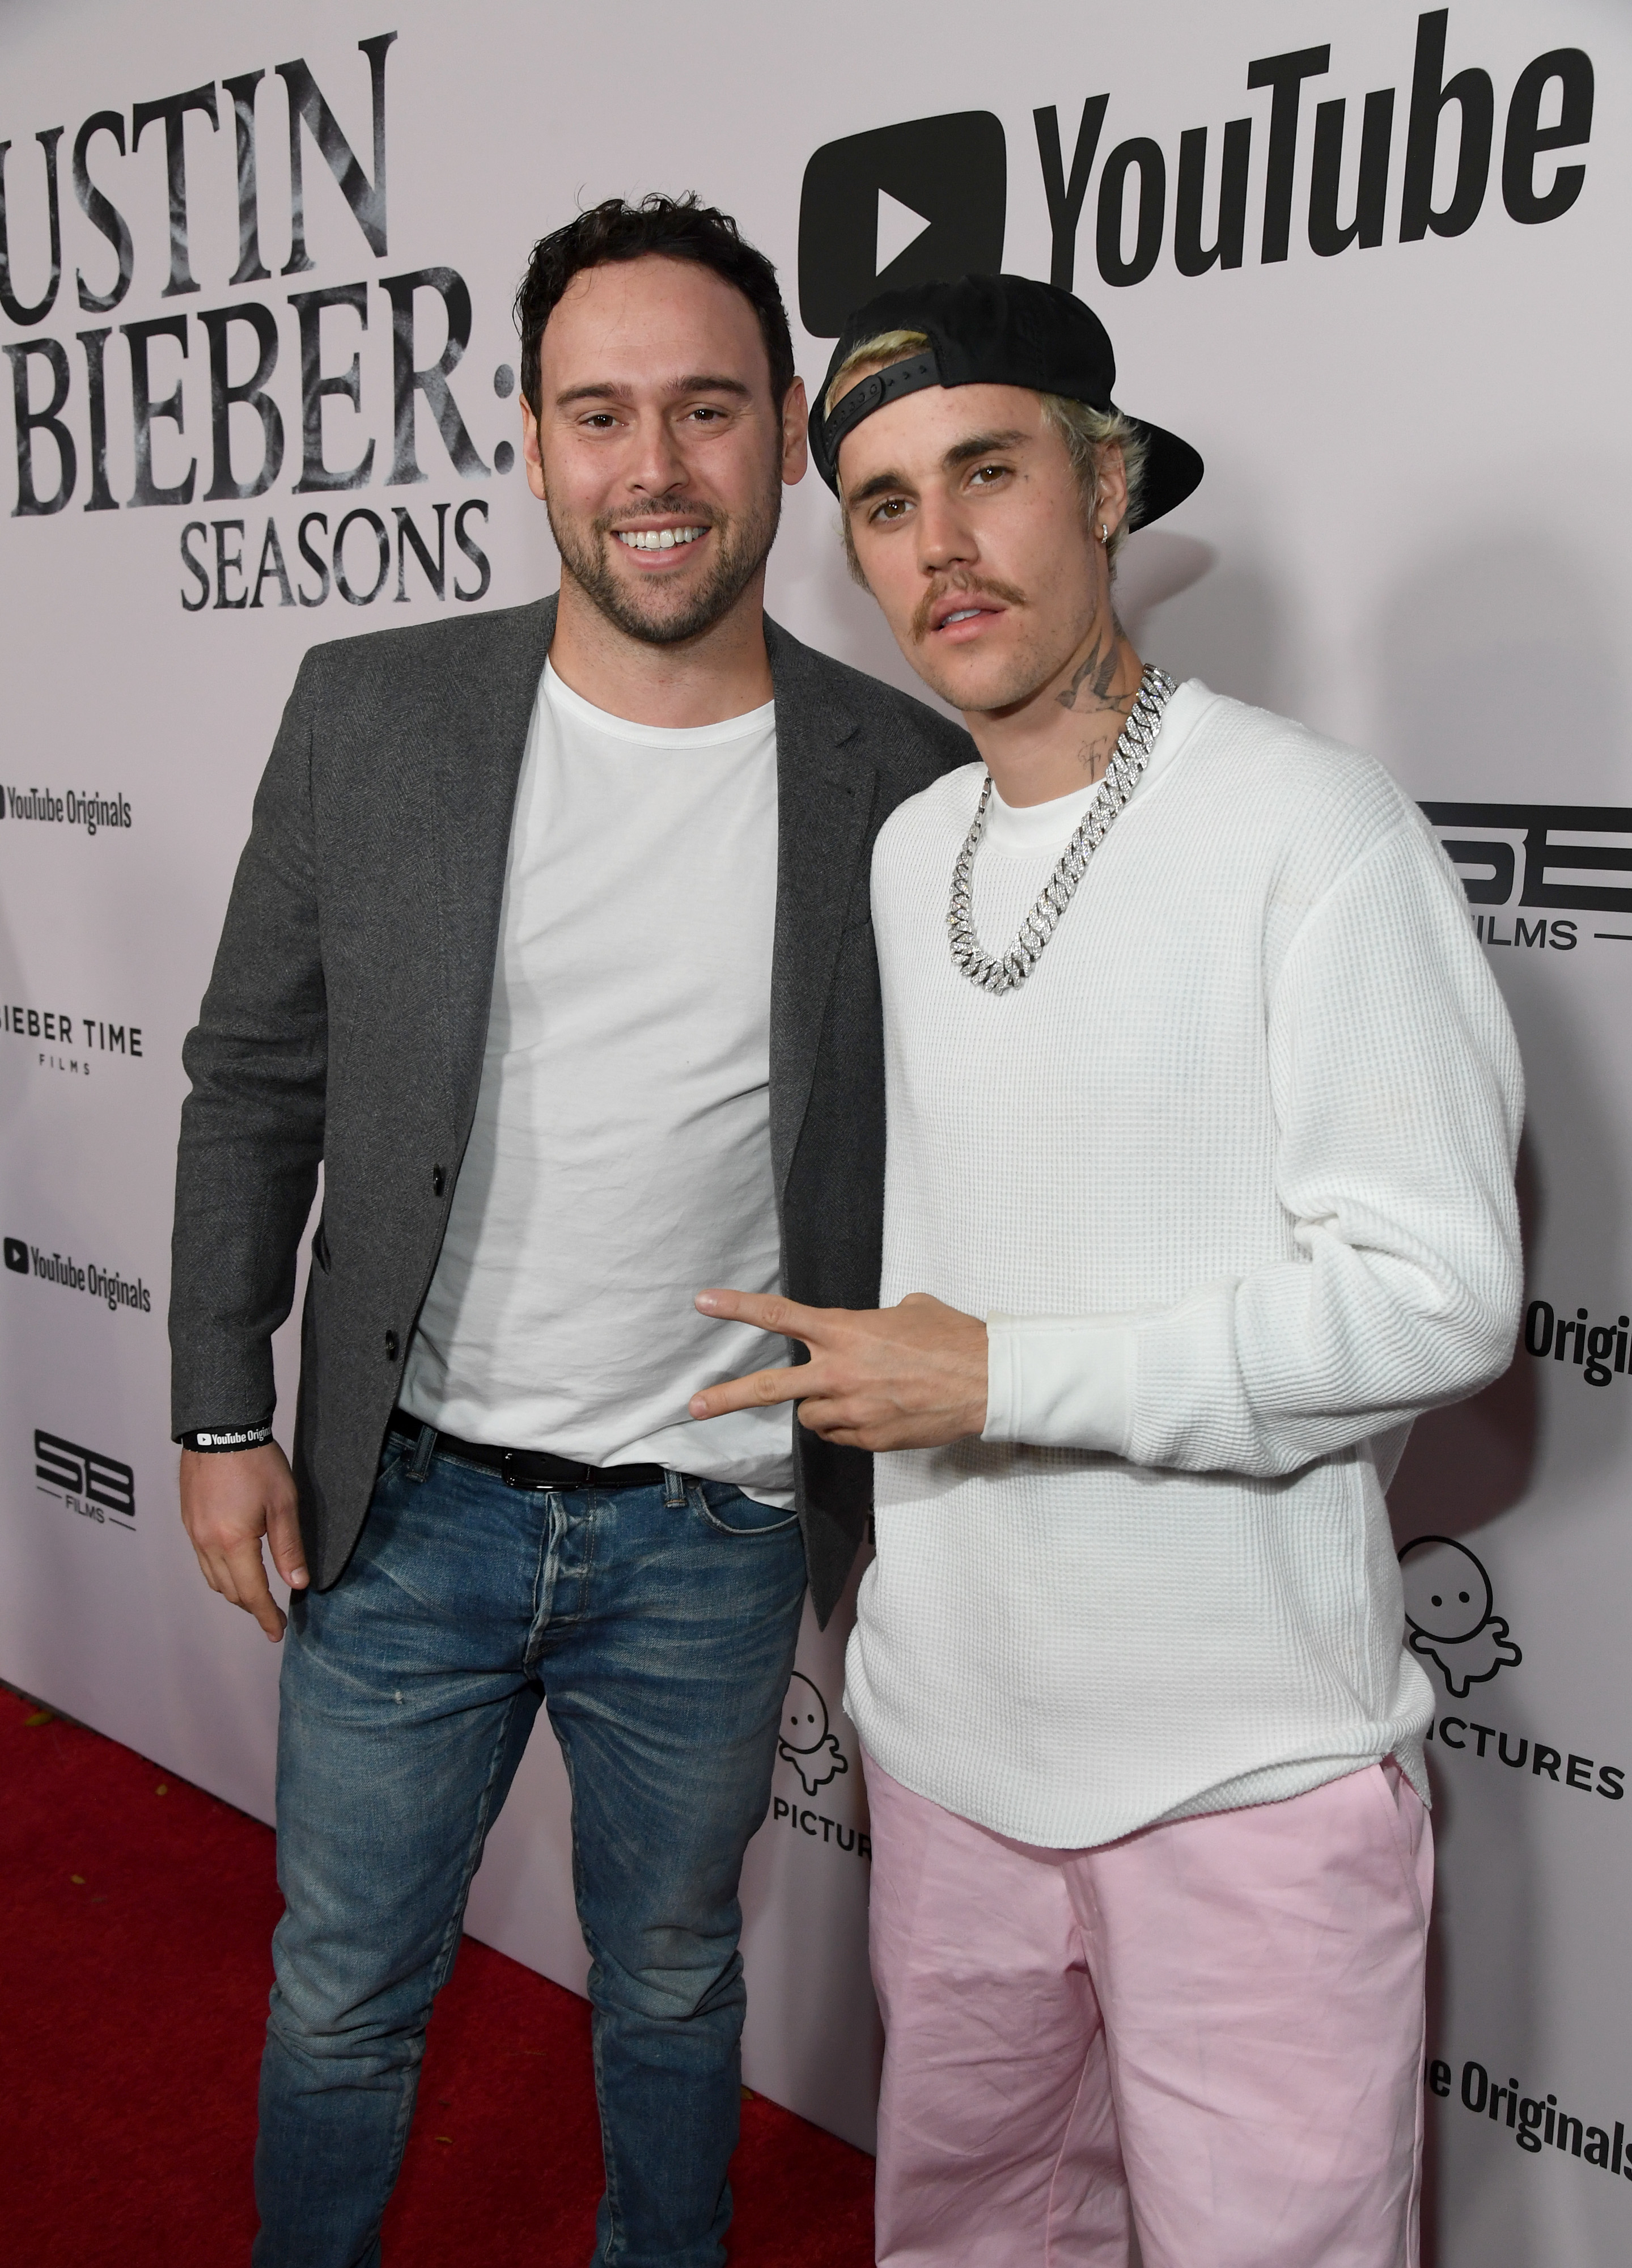 Scooter and Justin at an event together